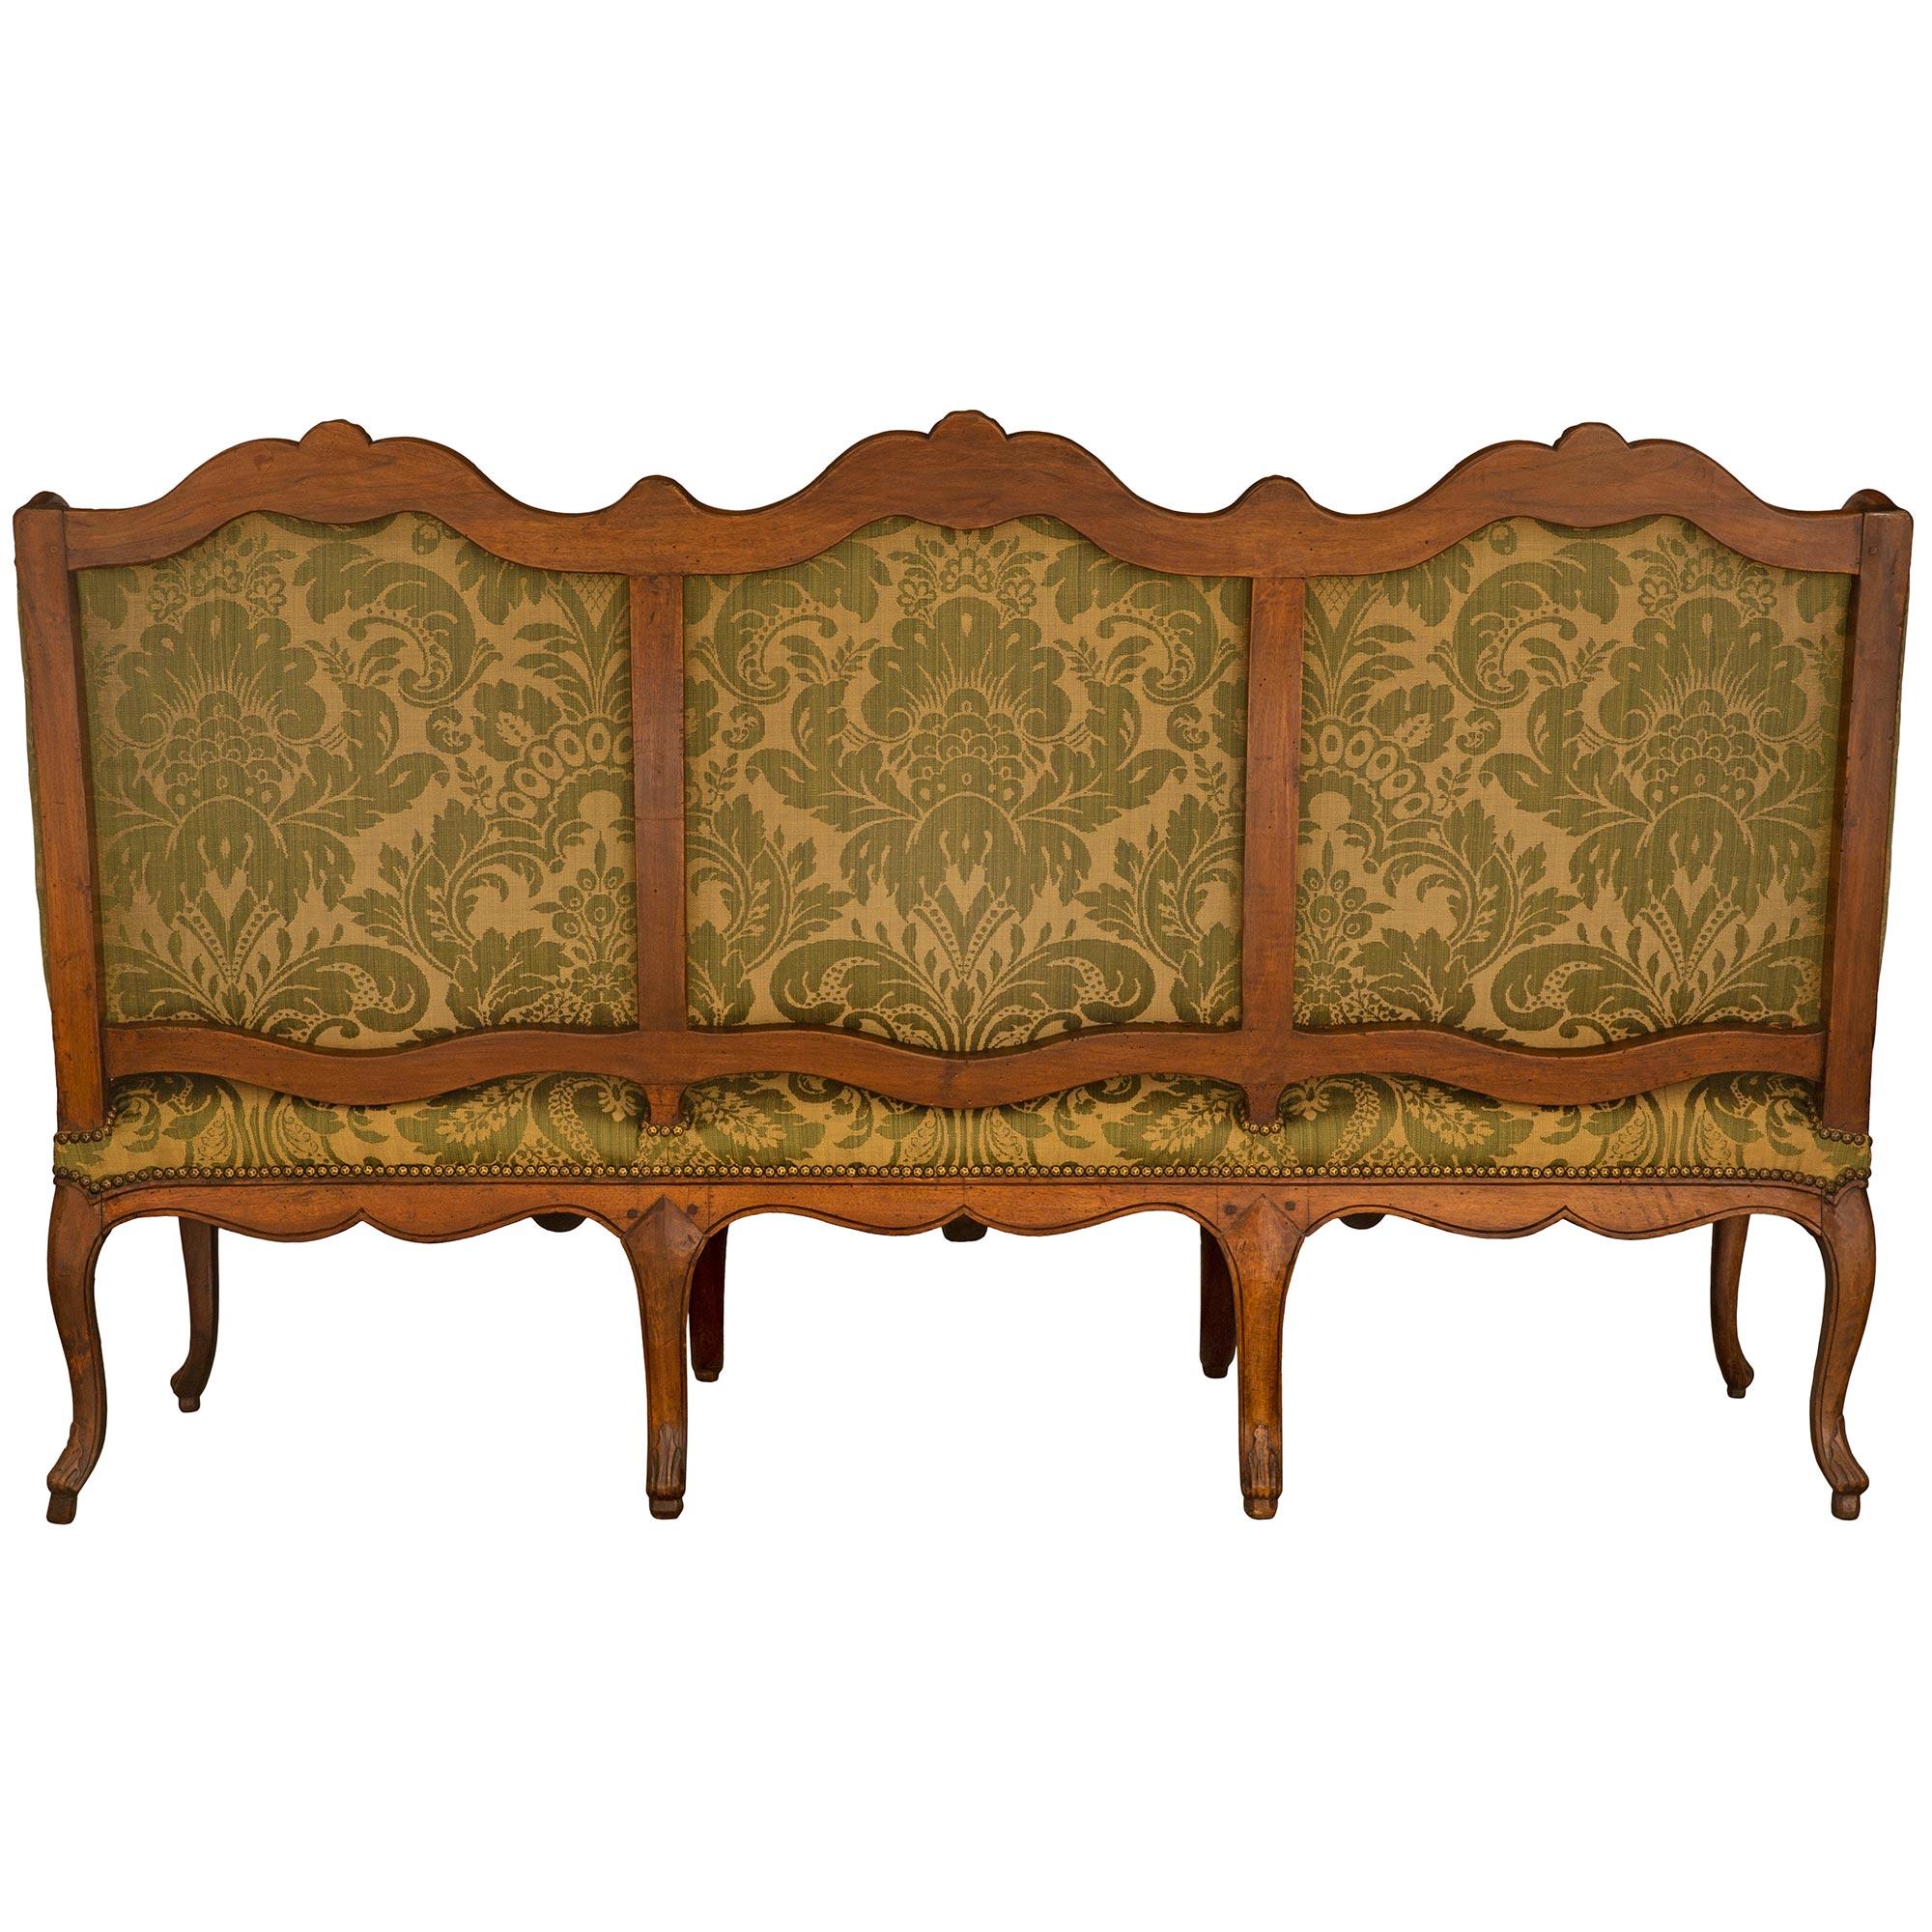 A large and richly carved French 18th century Louis XV period Walnut settee For Sale 2